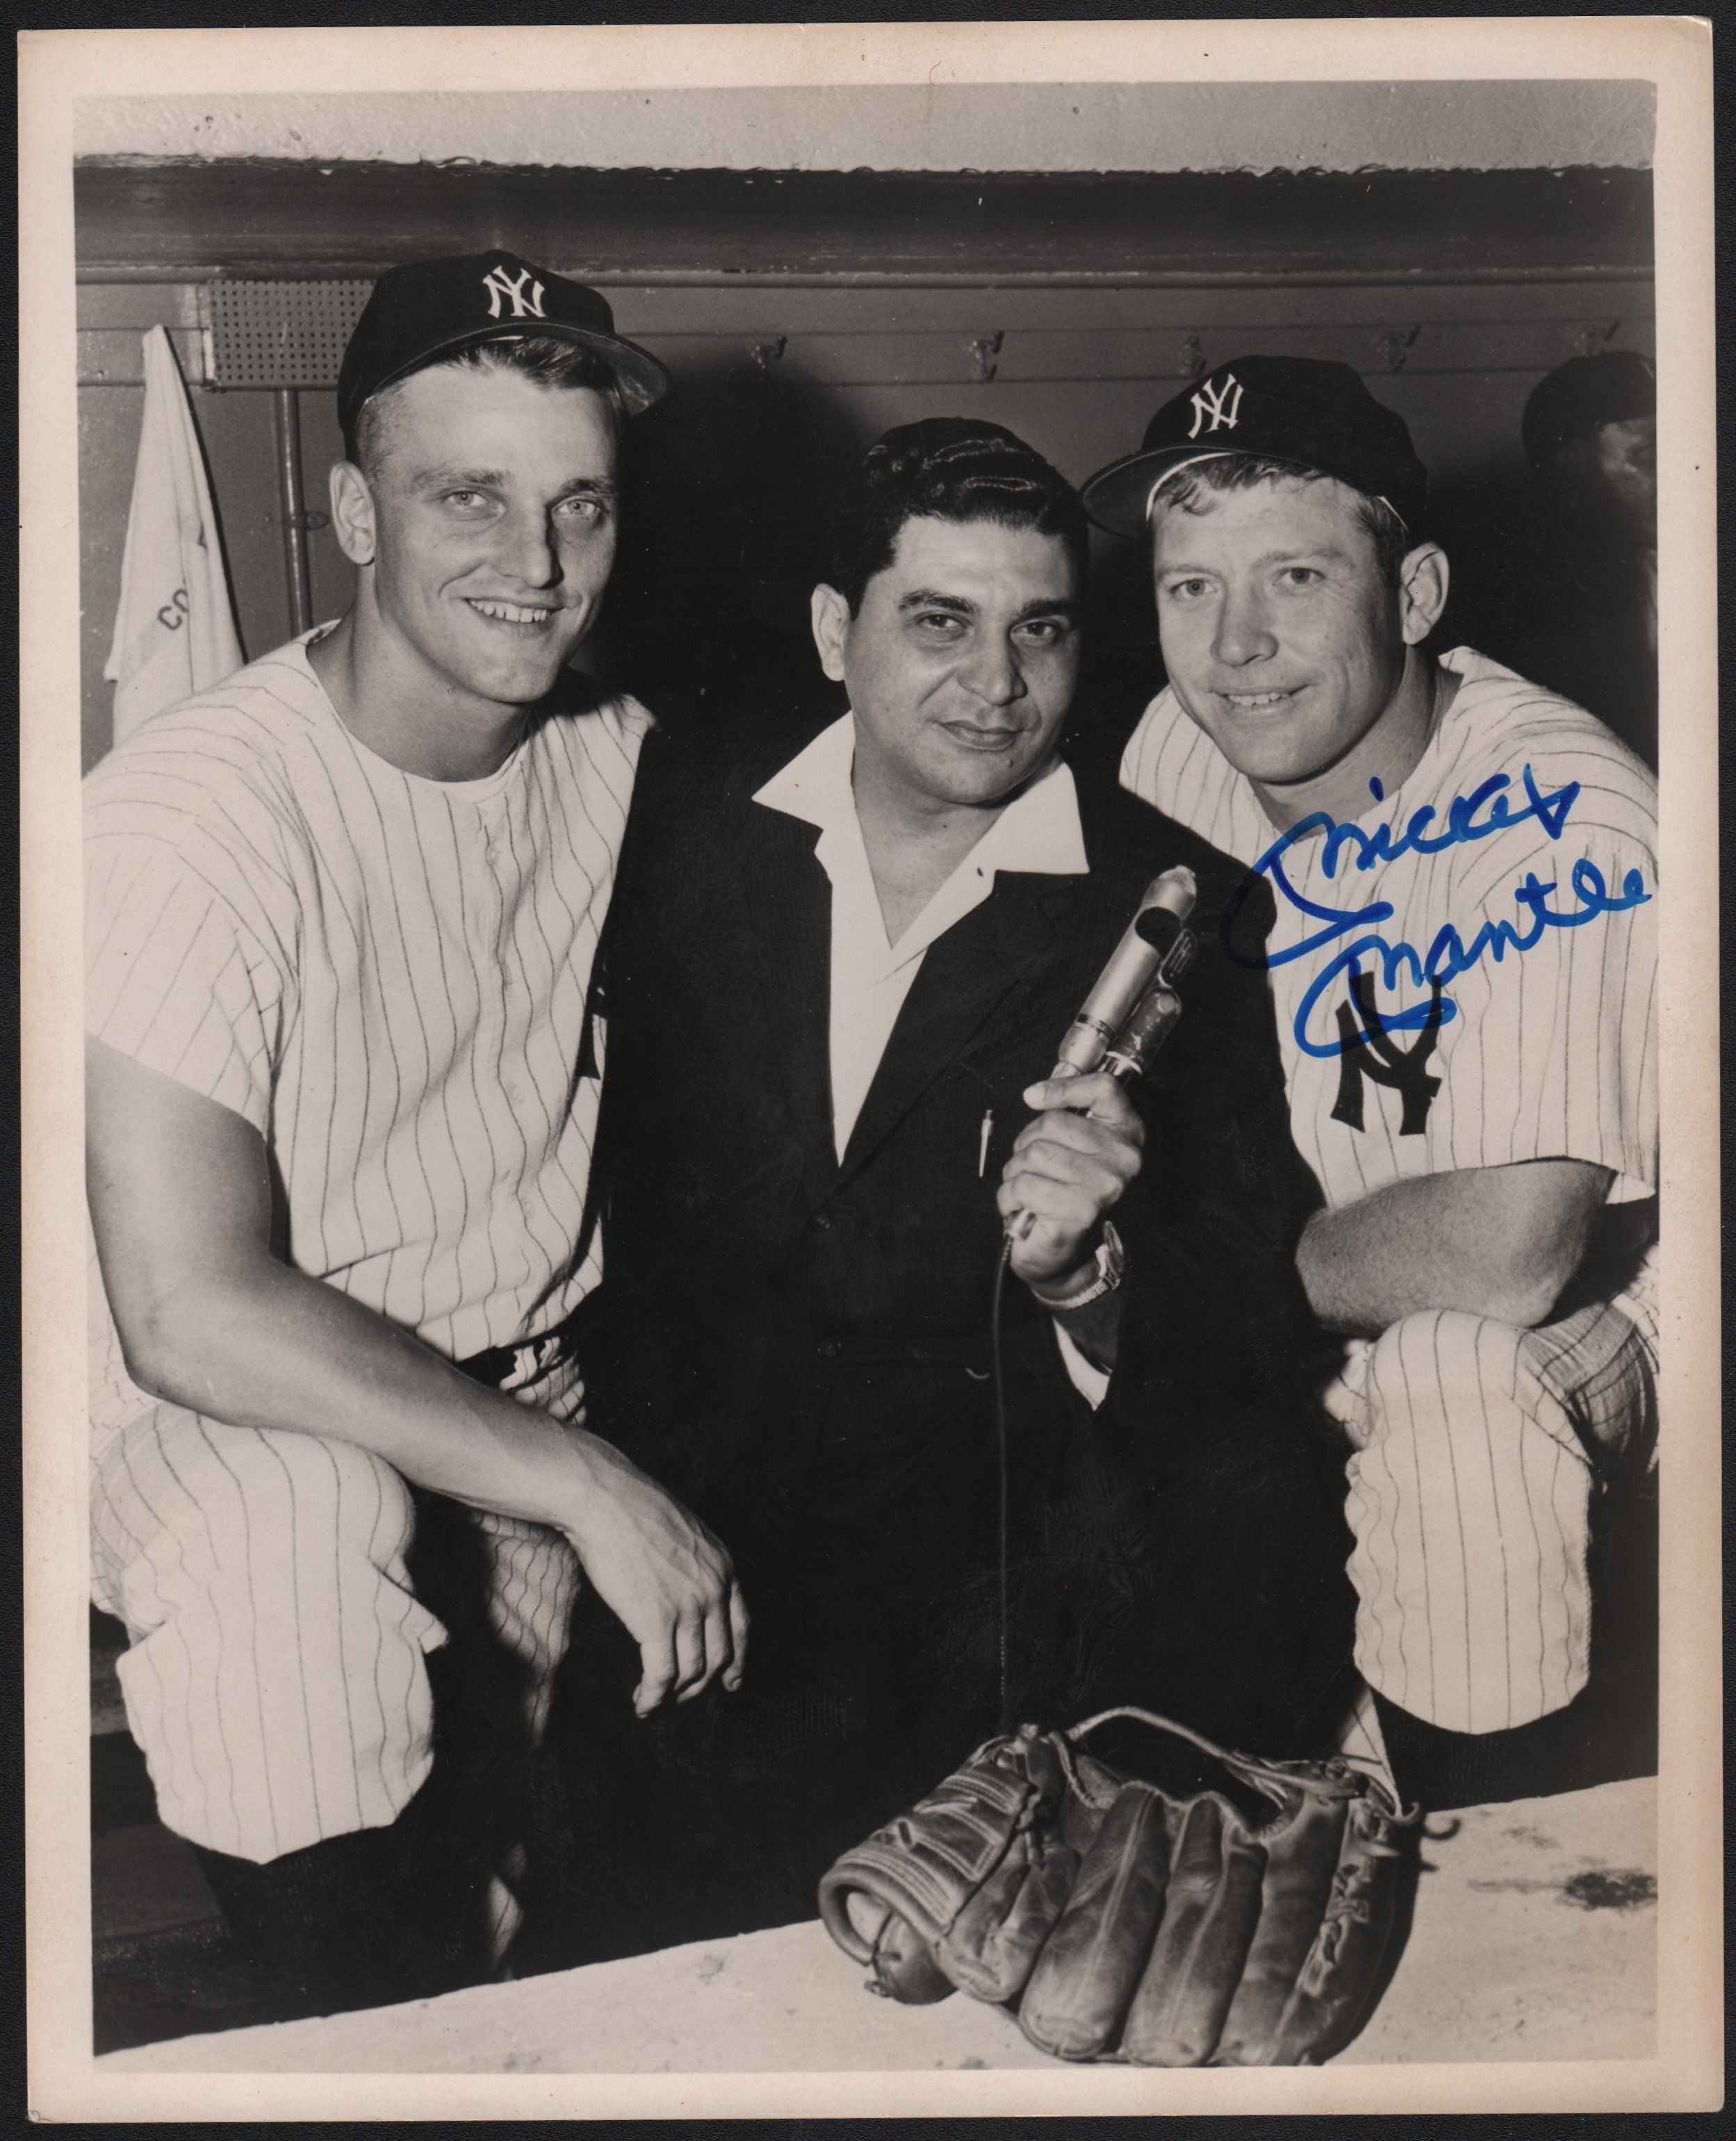 1980 Mickey Mantle In Person Signed Photo w/Roger Maris